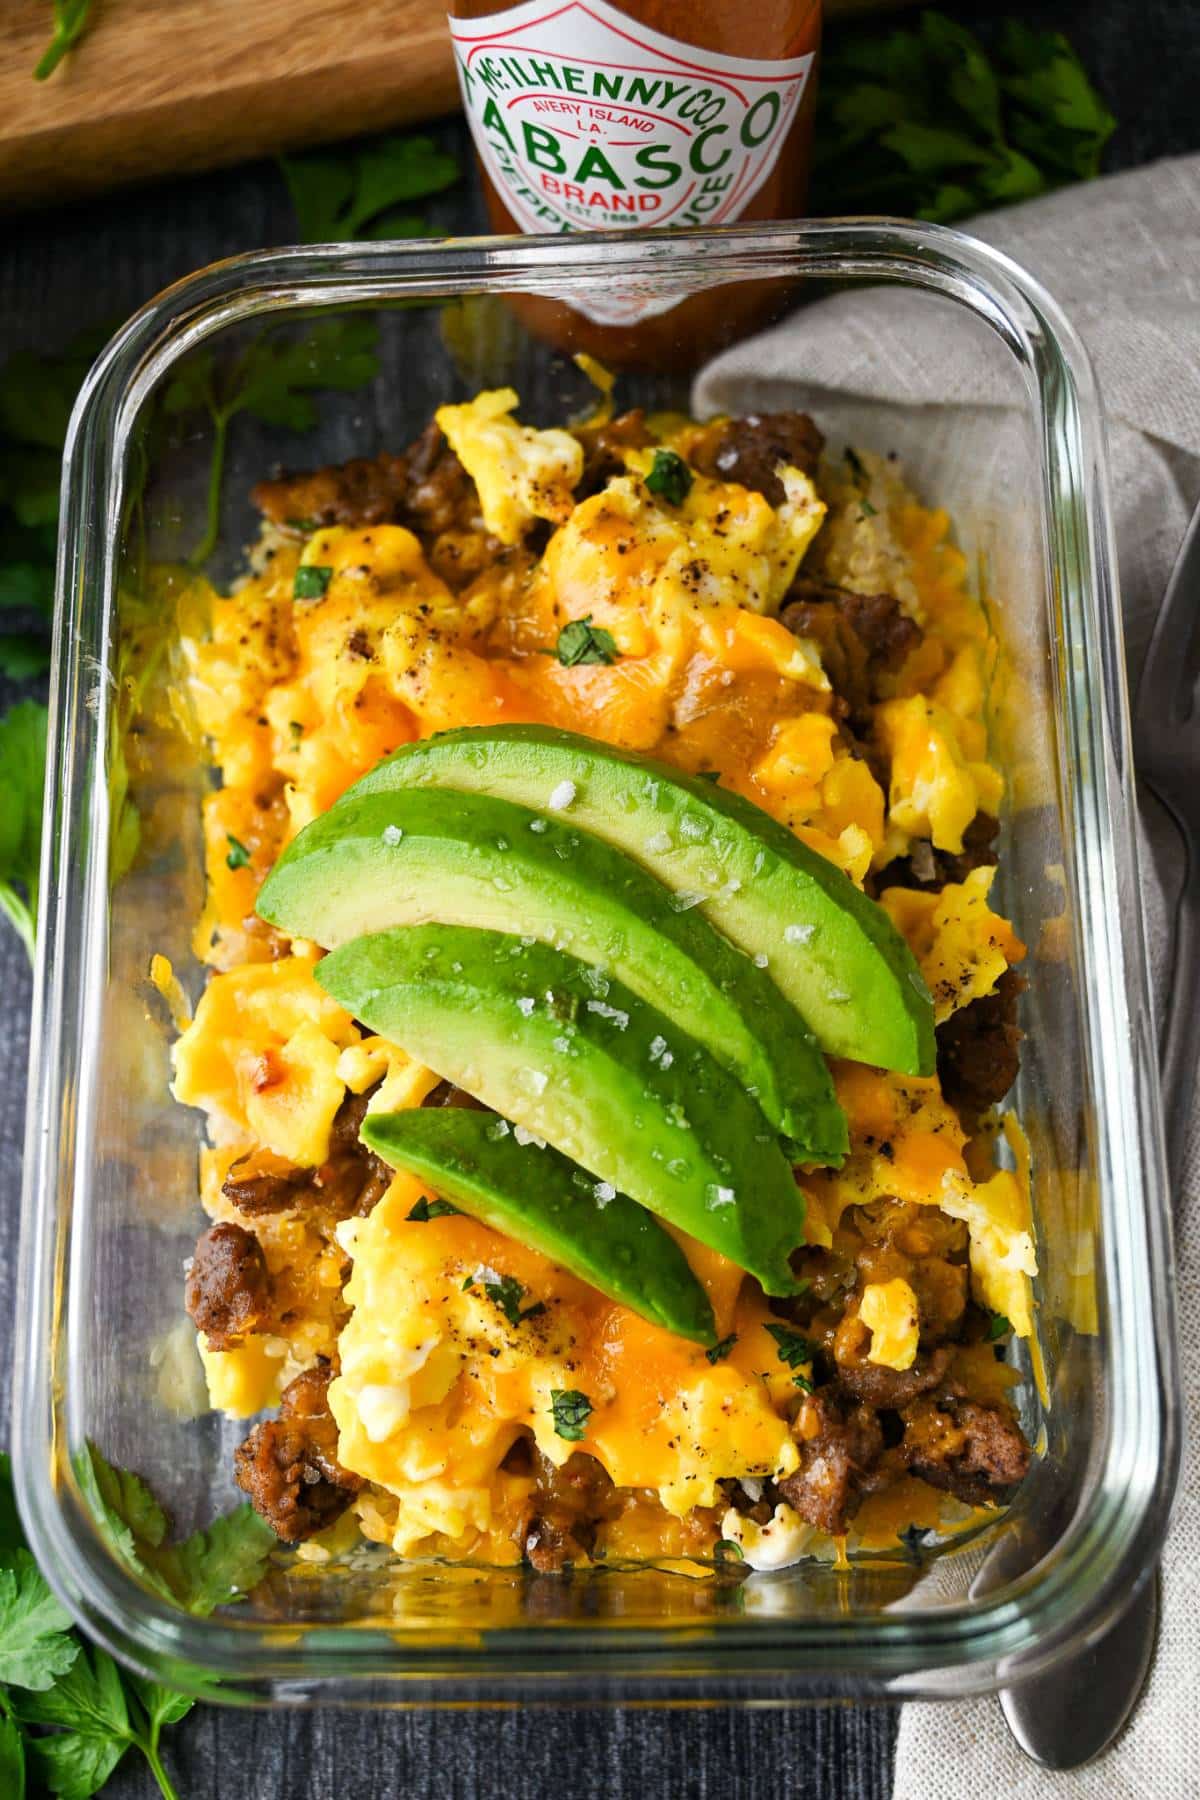 a breakfast bowl with eggs, cheese, turkey sausage and quinoa in a glass meal prep bowl with sliced avocado on top and a bottle of hot sauce behind it